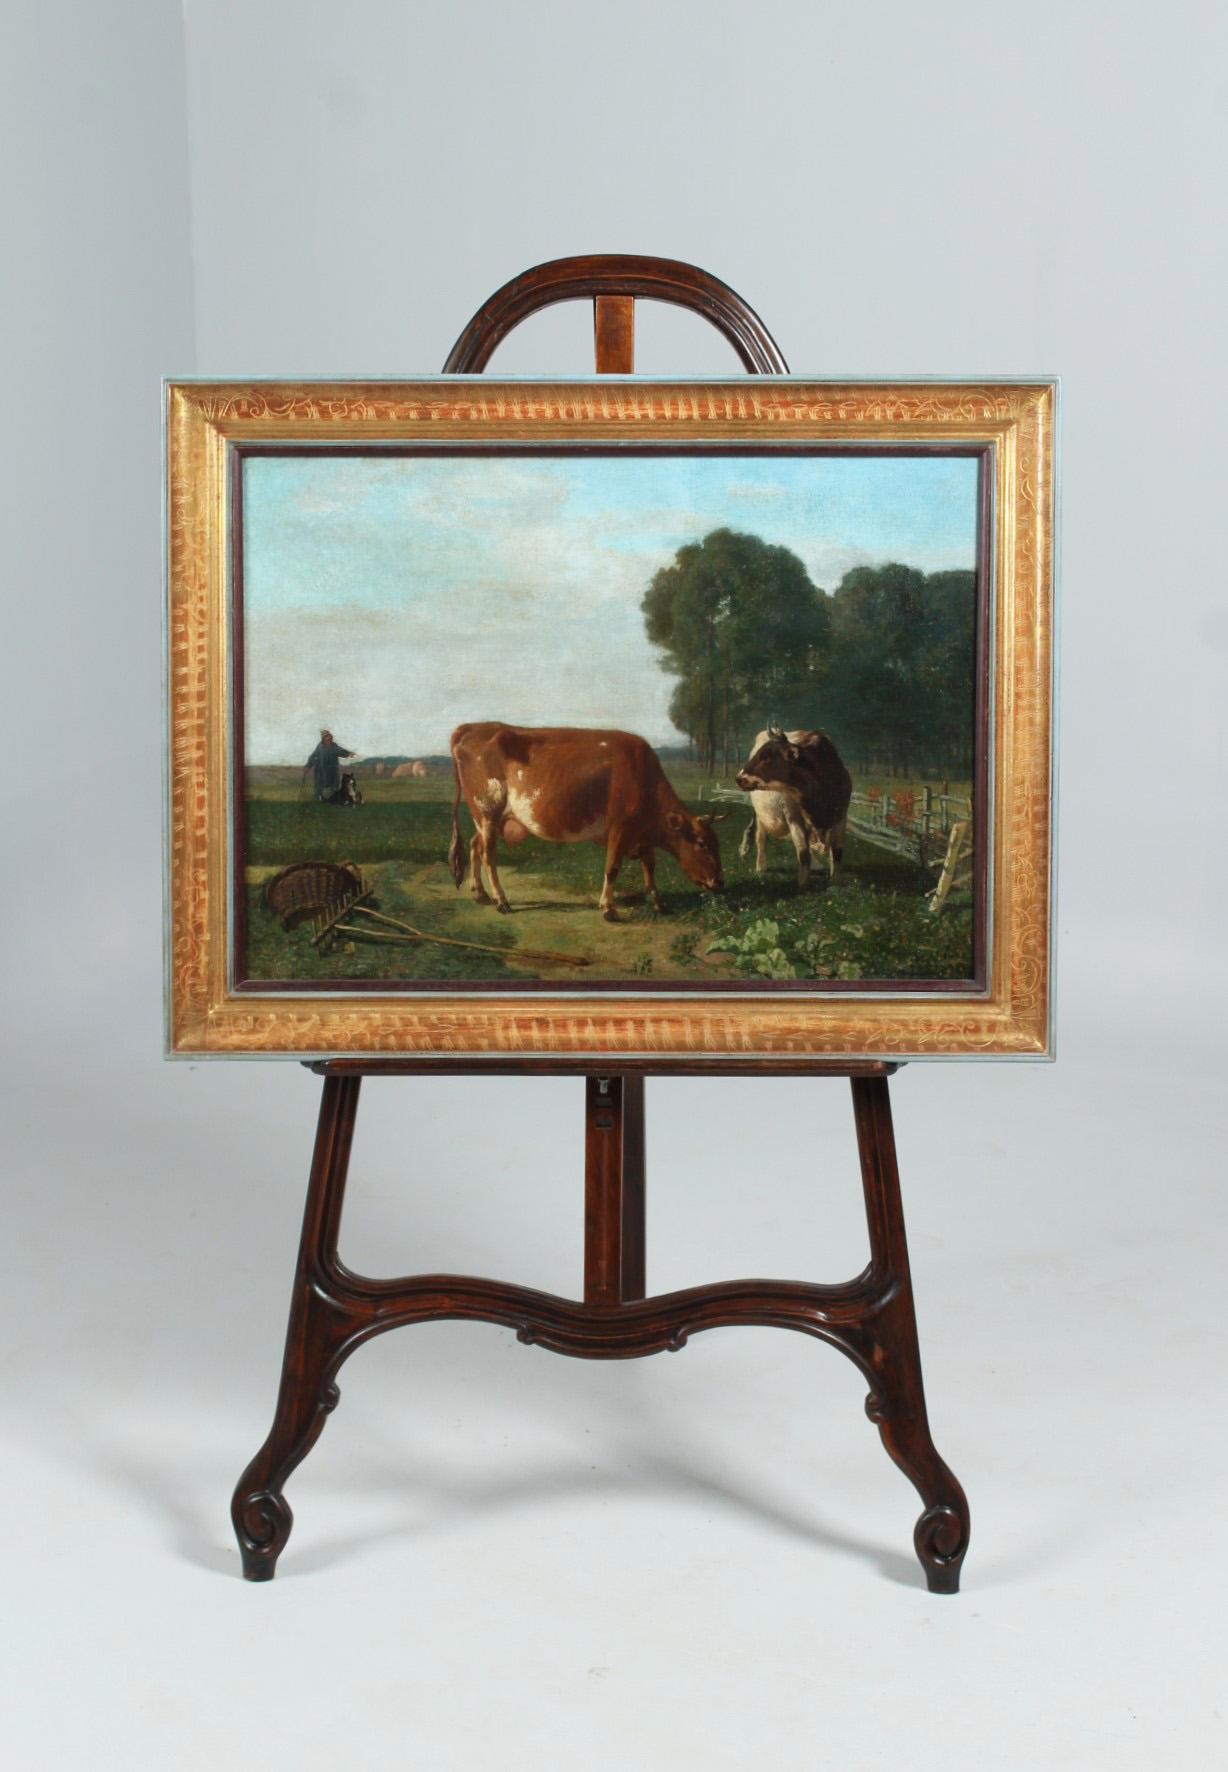 Antique romantic depiction of animals - oil on canvas.
Painted in Belgium at the end of the 19th century.

In the center we see two grazing cows next to farming equipment and in further distance a shepherd with herding dog.
The slightly cloudy